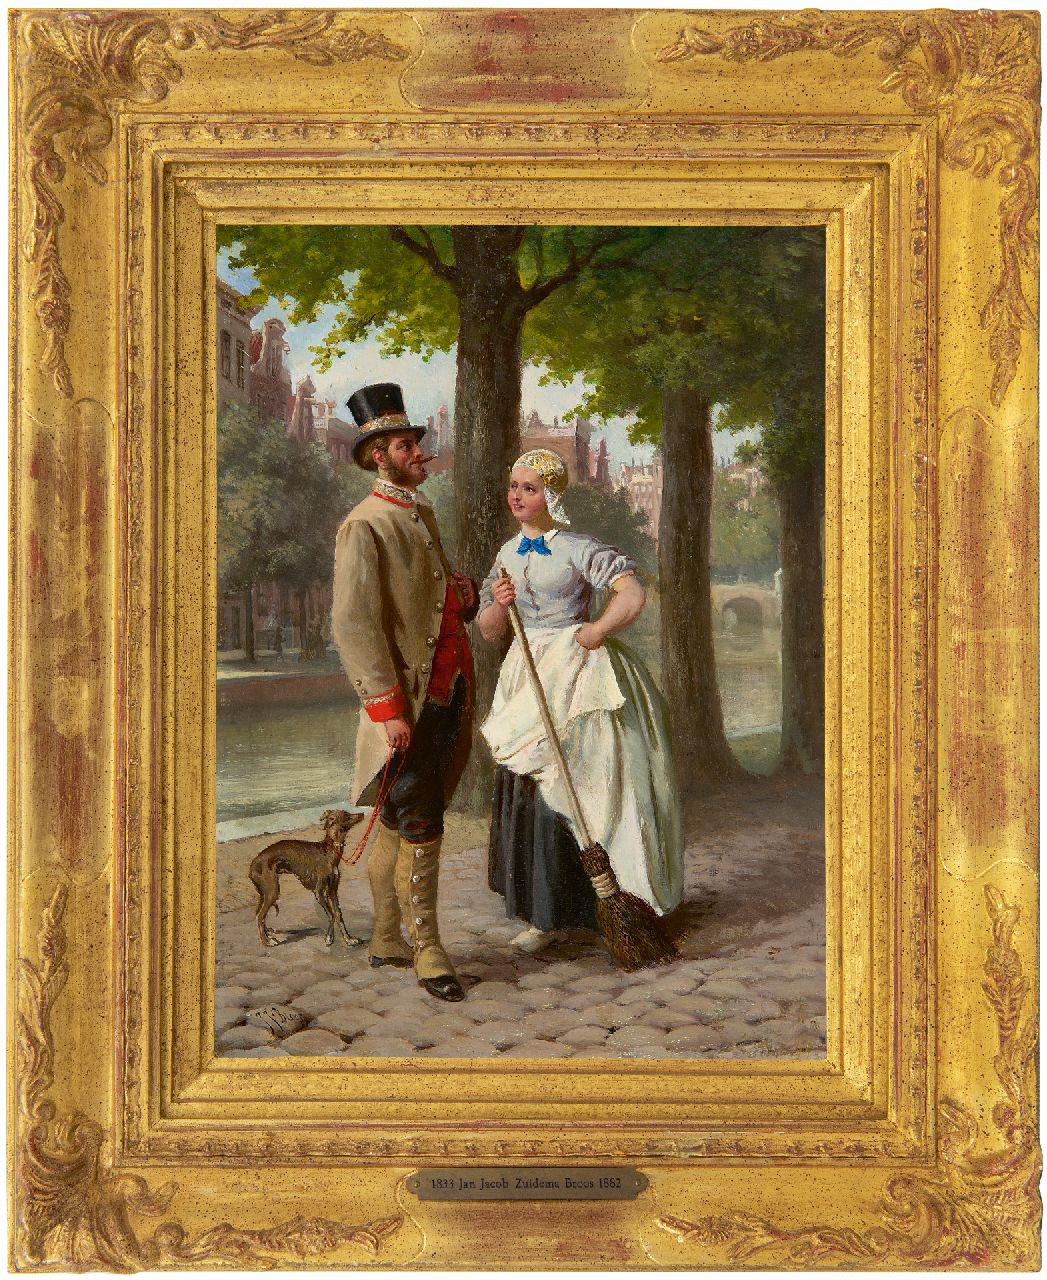 Zuidema Broos J.J.  | Jan Jacob Zuidema Broos | Paintings offered for sale | Romance along the canal, Amsterdam, oil on panel 29.0 x 21.0 cm, signed l.l.